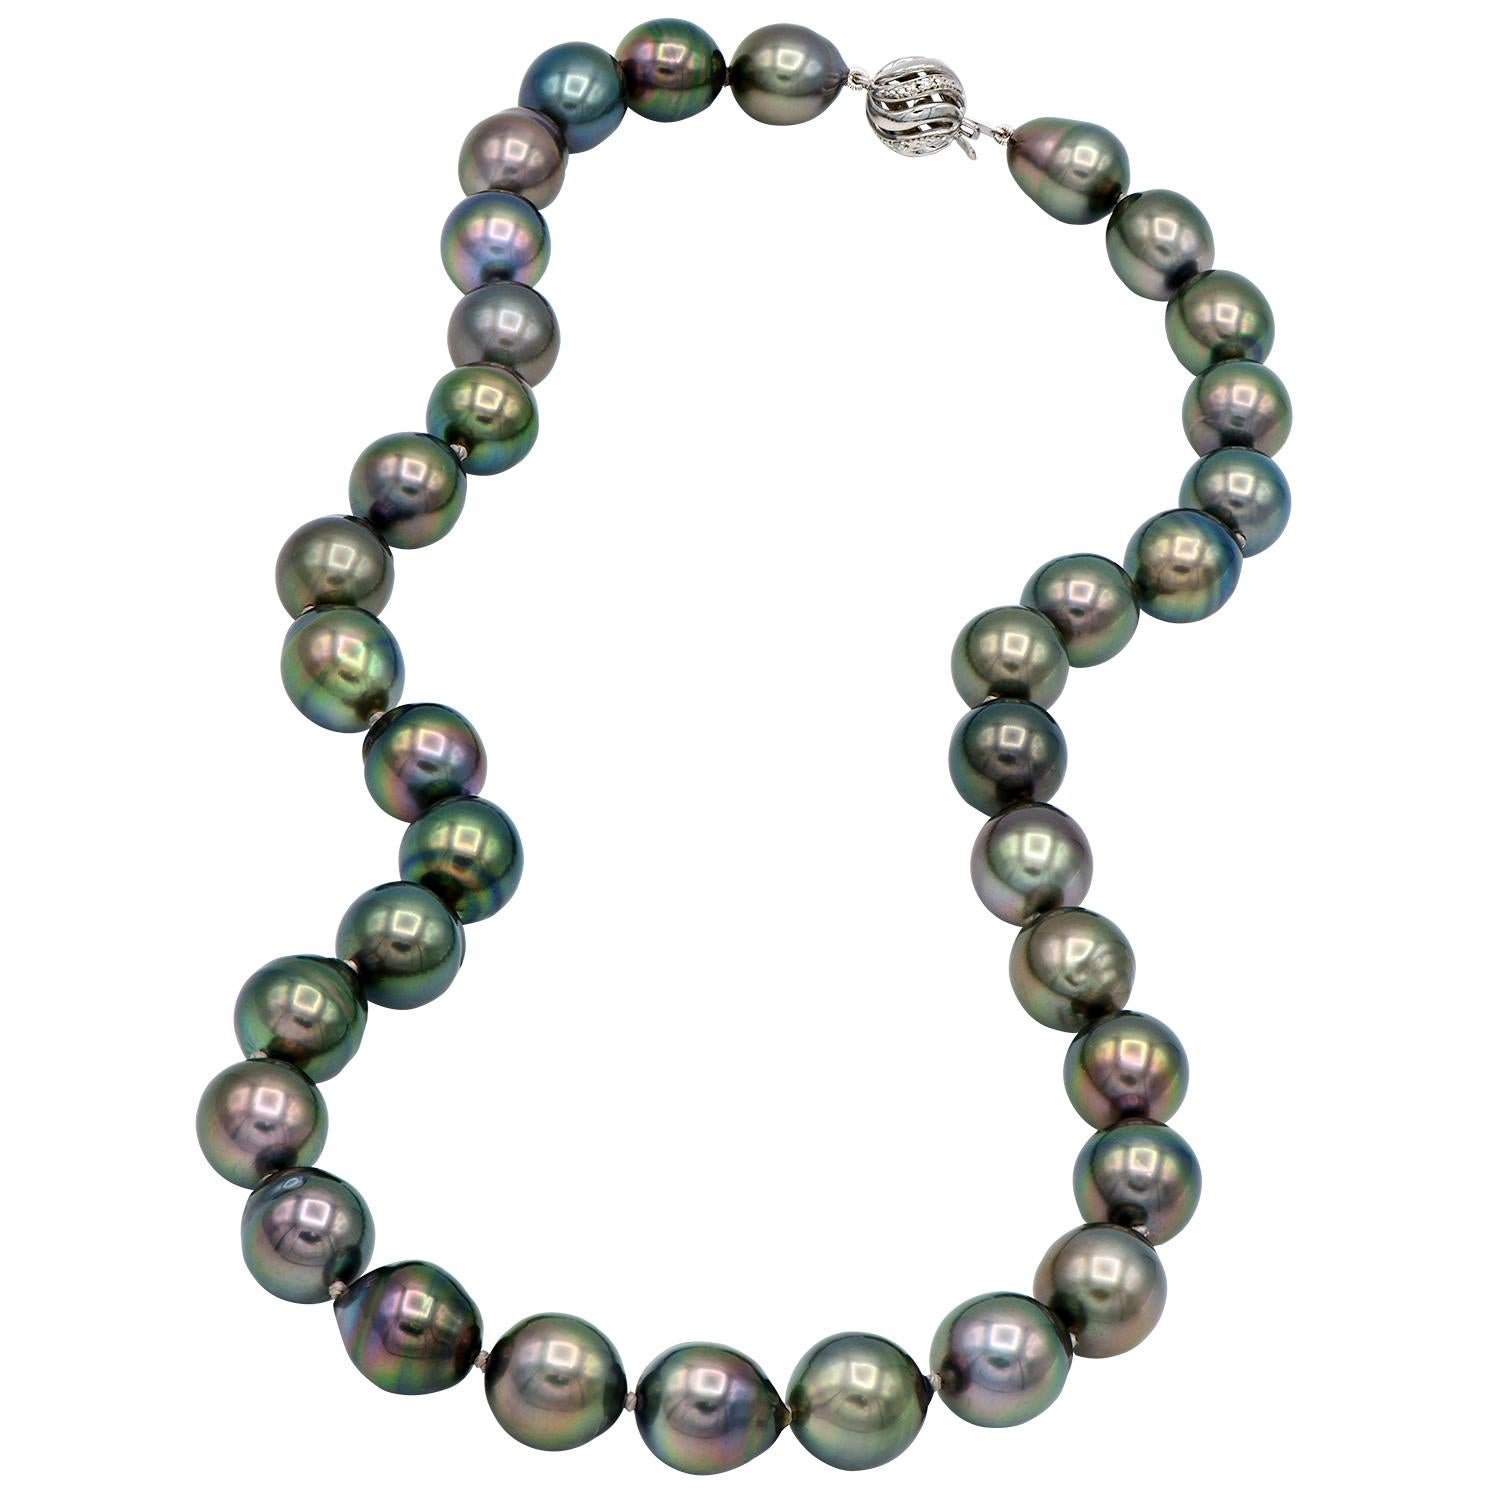 This beautiful strand of Tahitian black pearls is made completely of baroque pearls each giving their own unique shape. The pearls have gorgeous undertones making them seem iridescent and glowing. There are 35 pearls making up this 18 inch strand